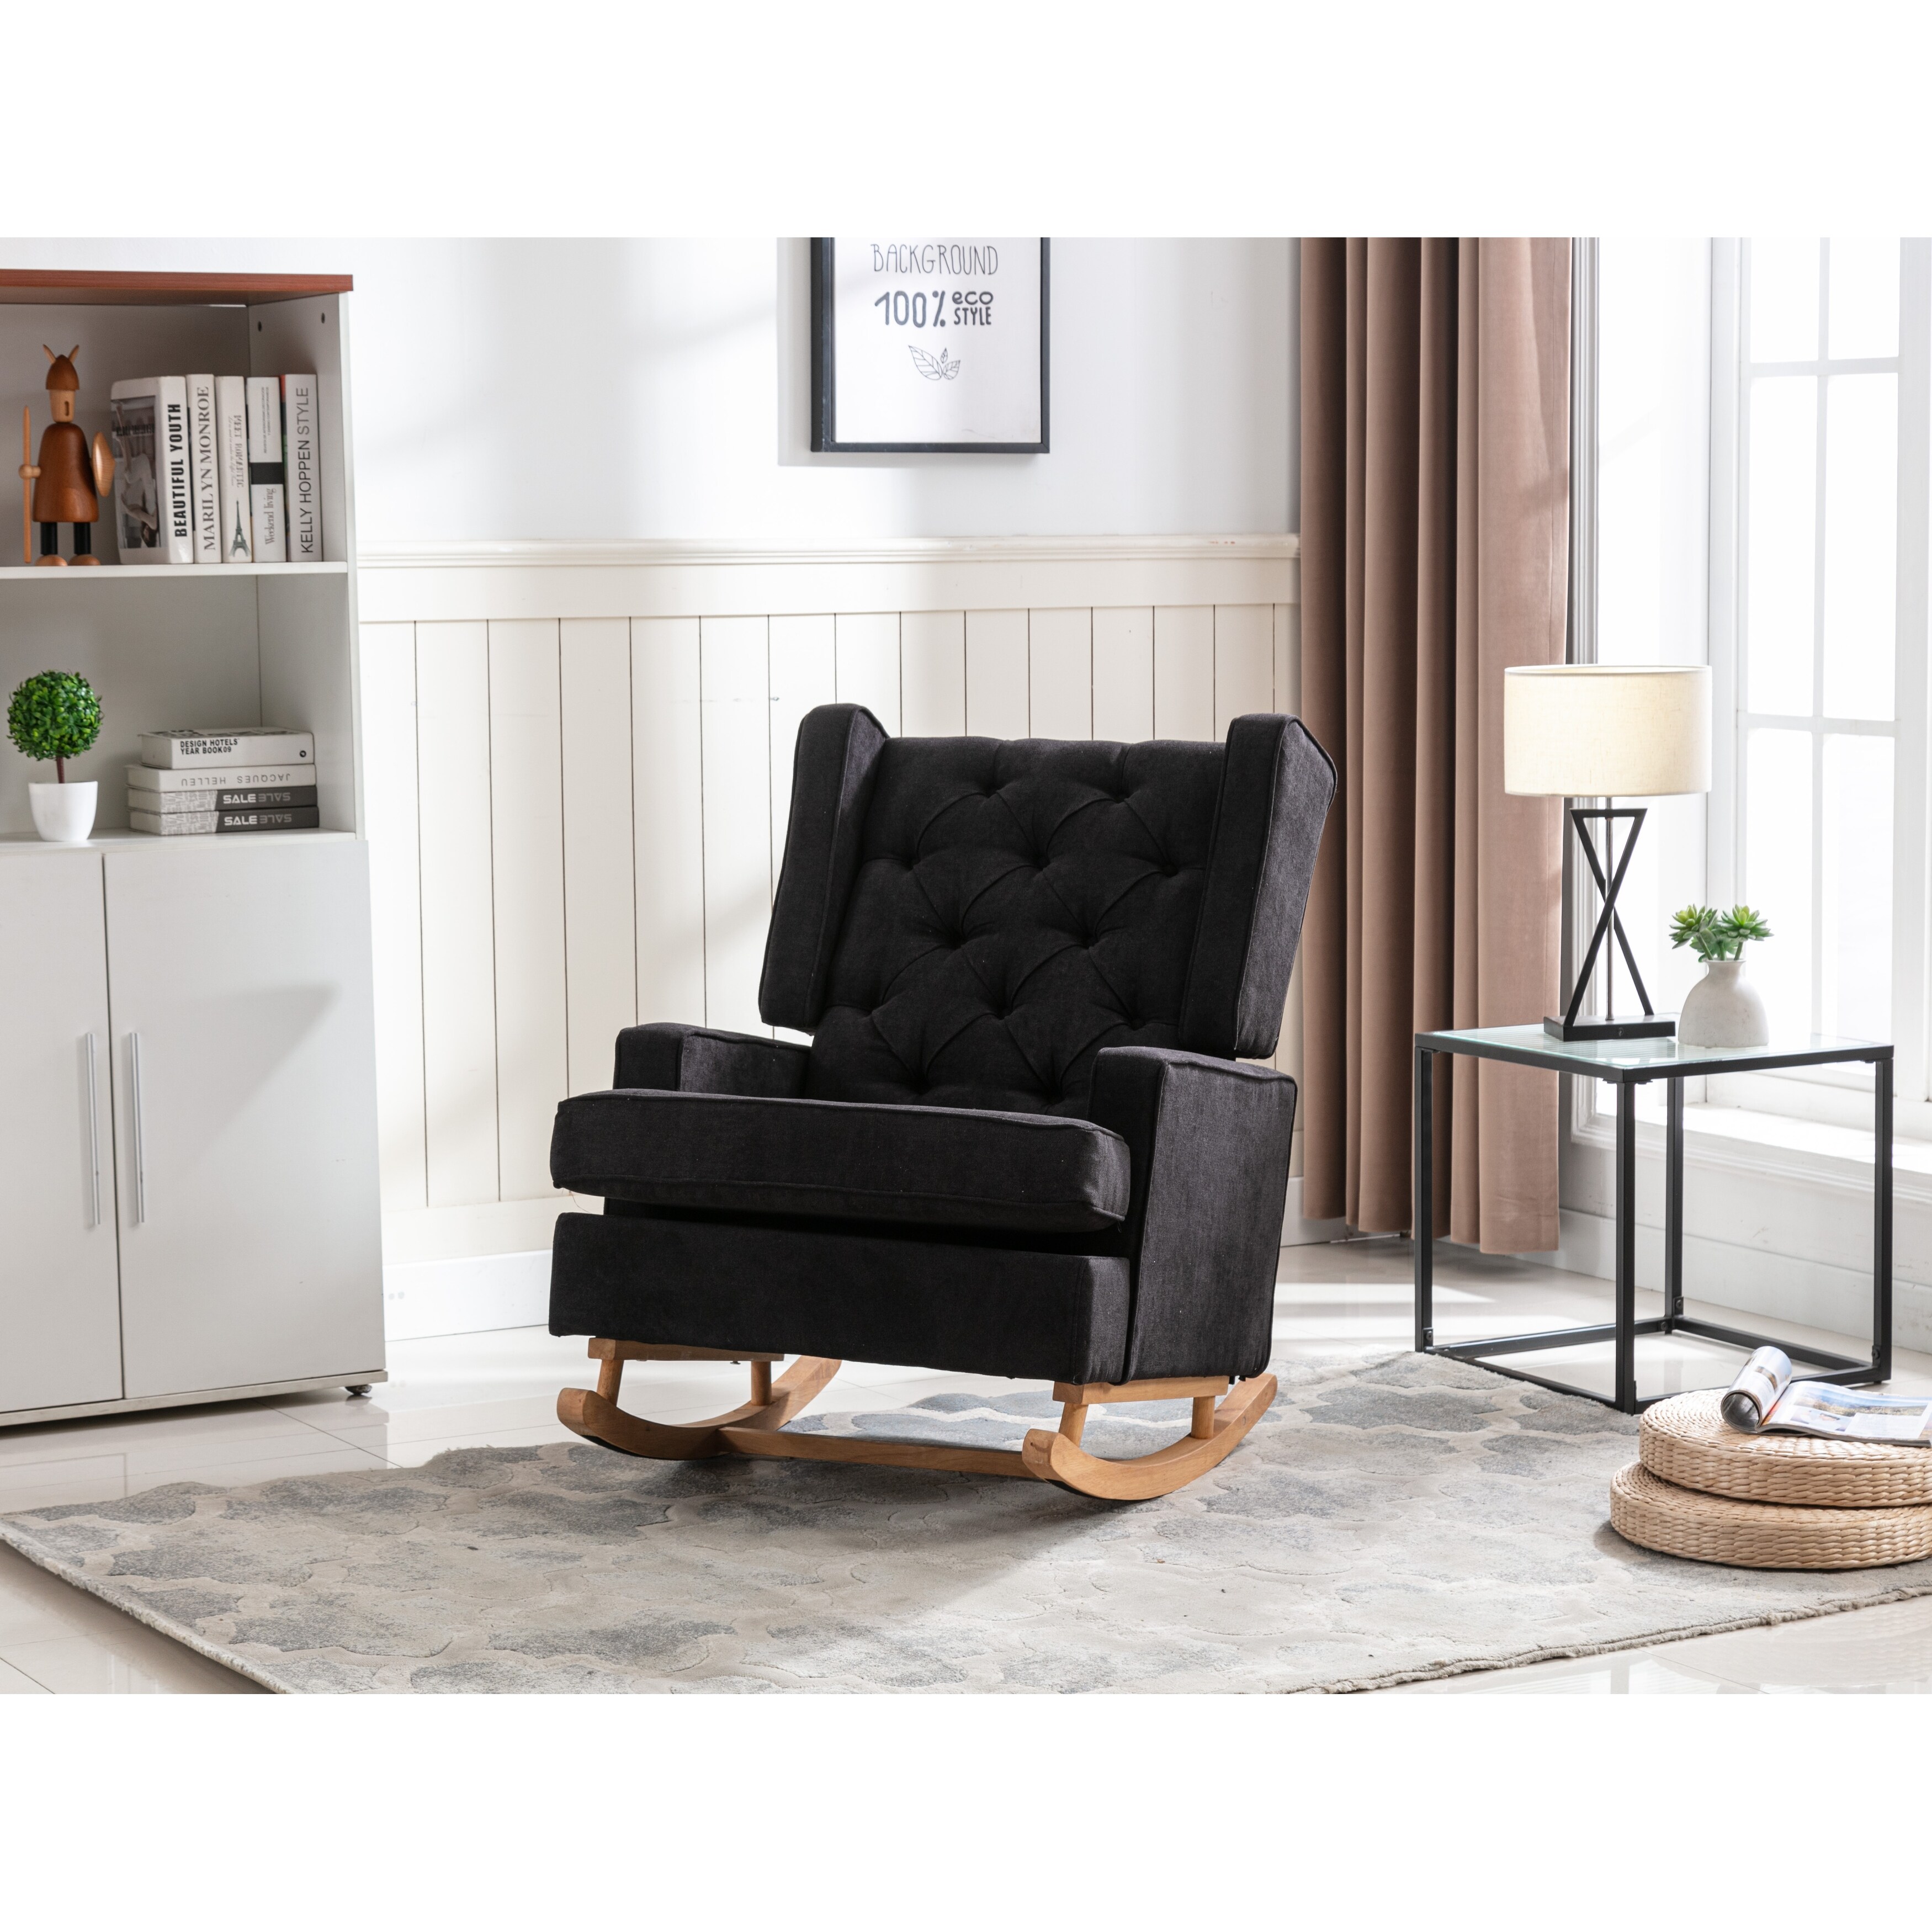 Living Room Comfortable Rocking Chair Accent Chair, Black